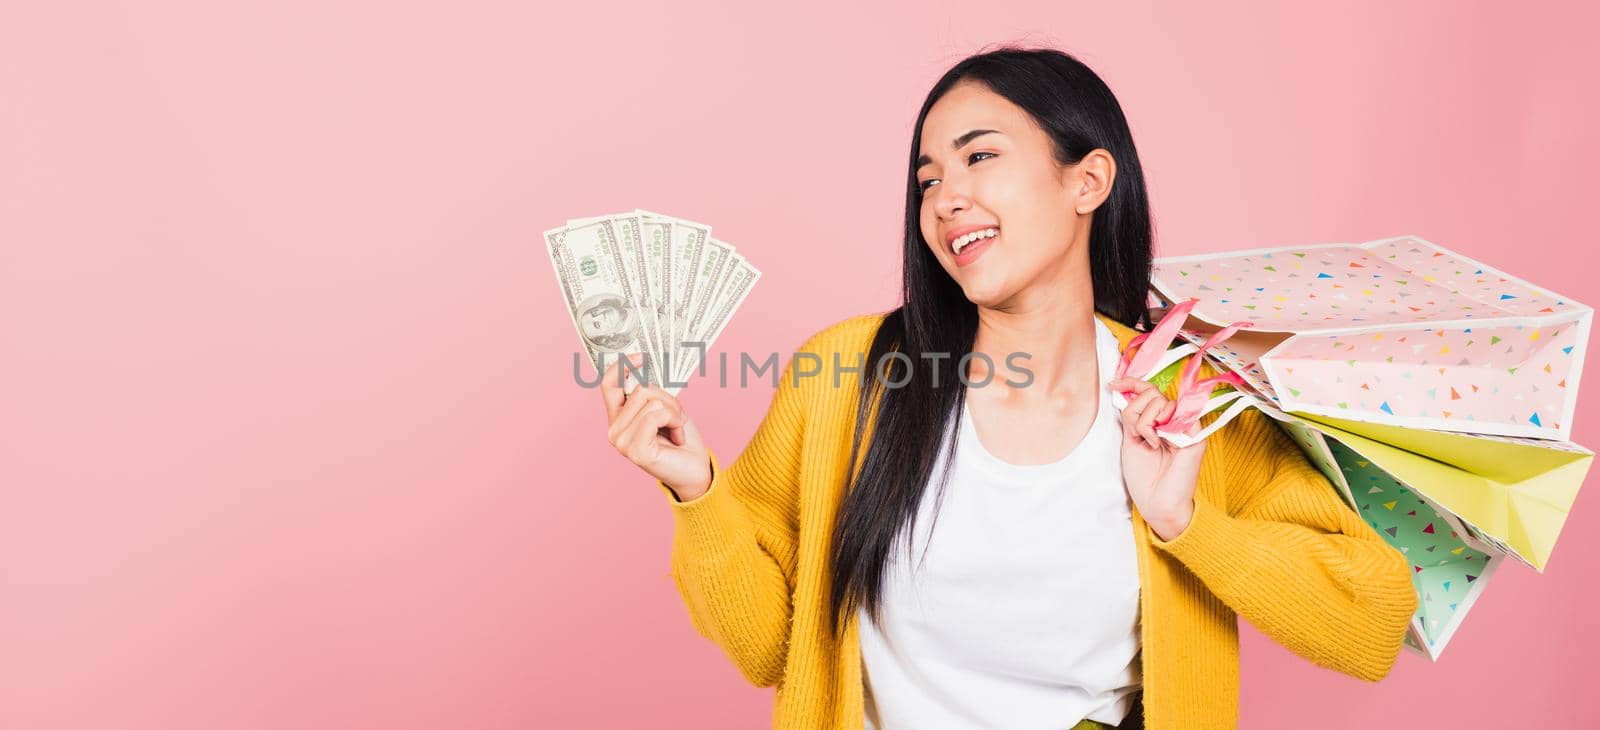 woman shopper smile excited holding online shopping bags colorful multicolor and dollar money banknotes by Sorapop